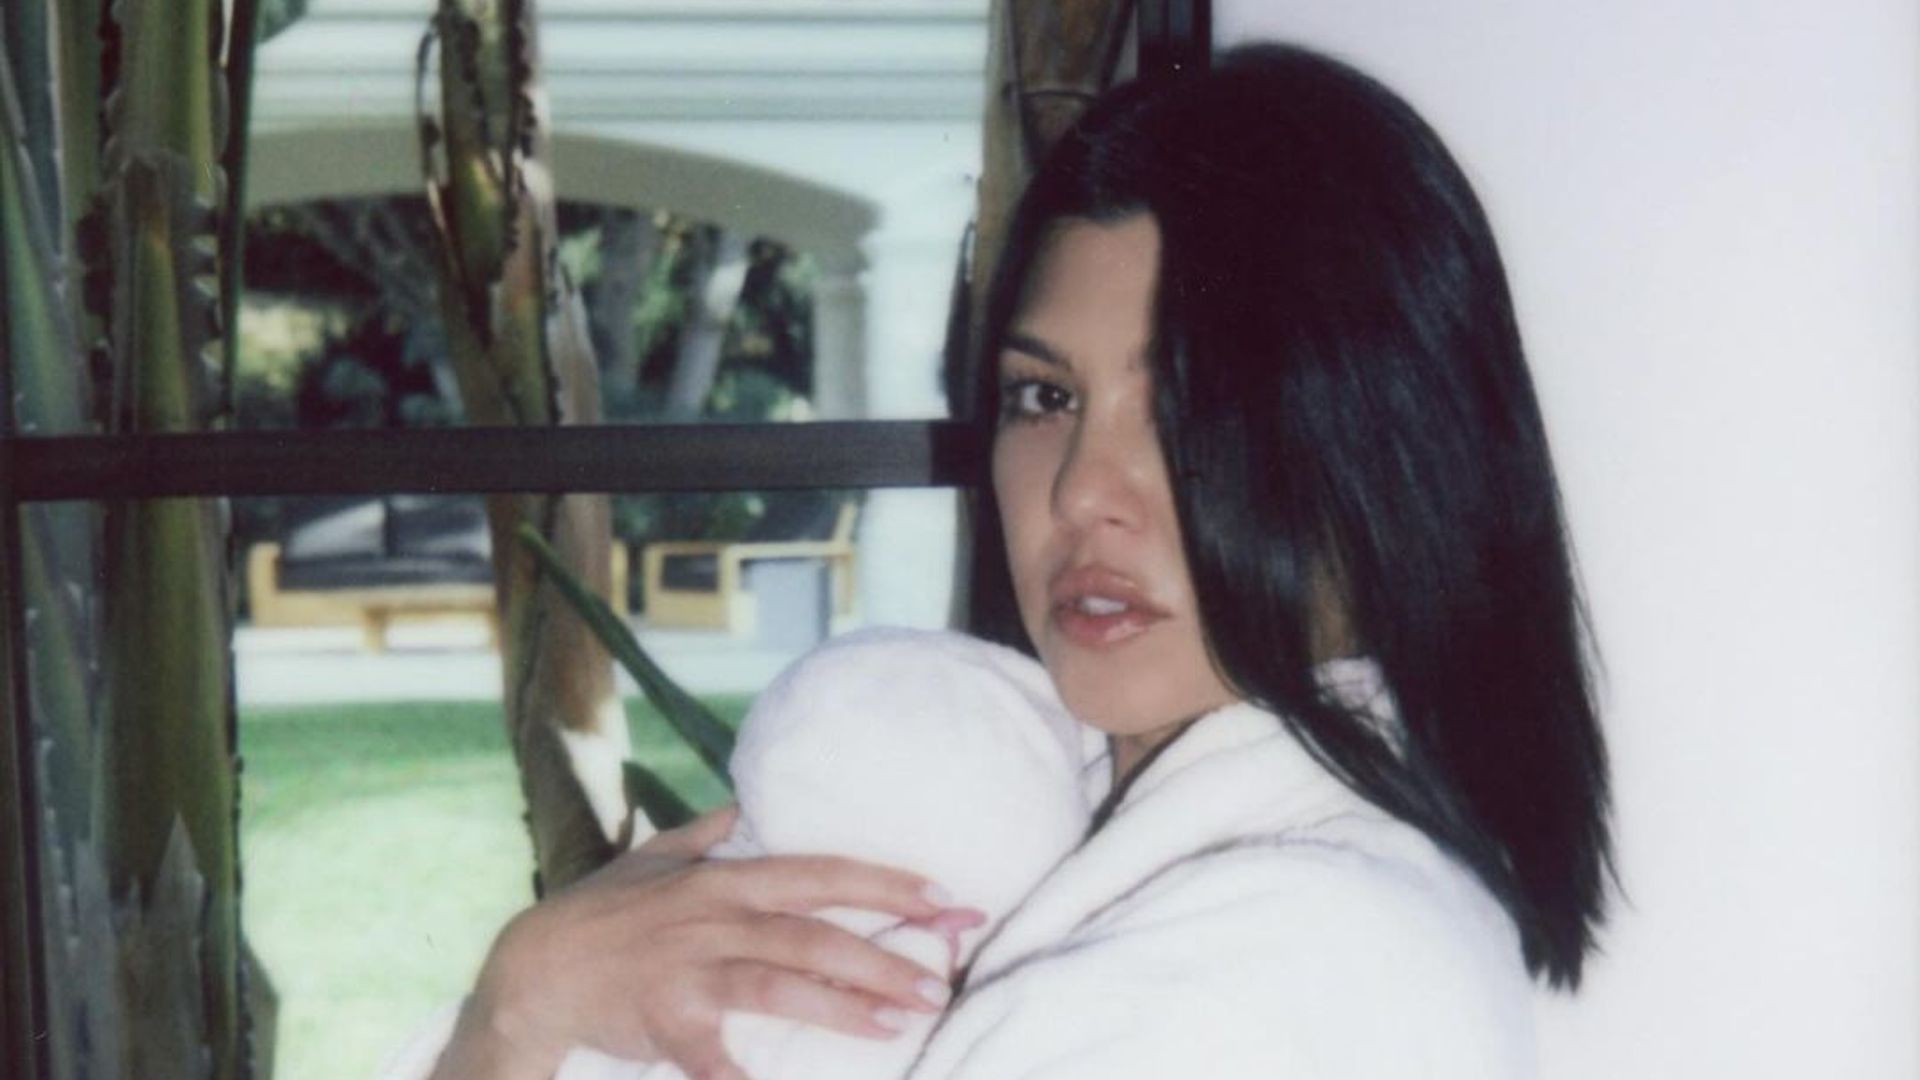 Kourtney Kardashian's photo with baby Rocky resembles like a throwback due to just how young she looks! 